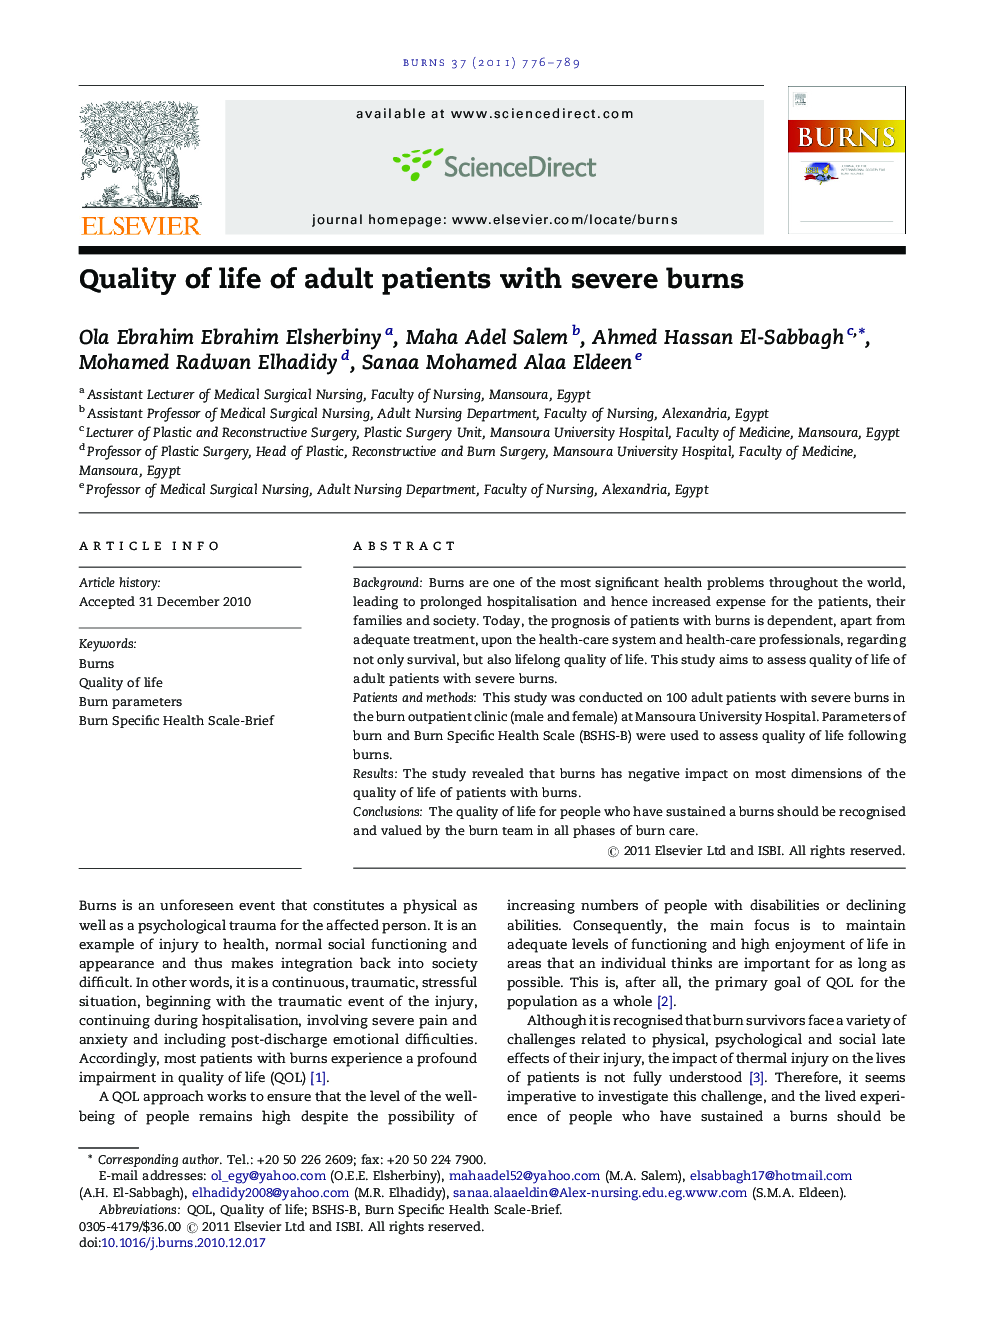 Quality of life of adult patients with severe burns